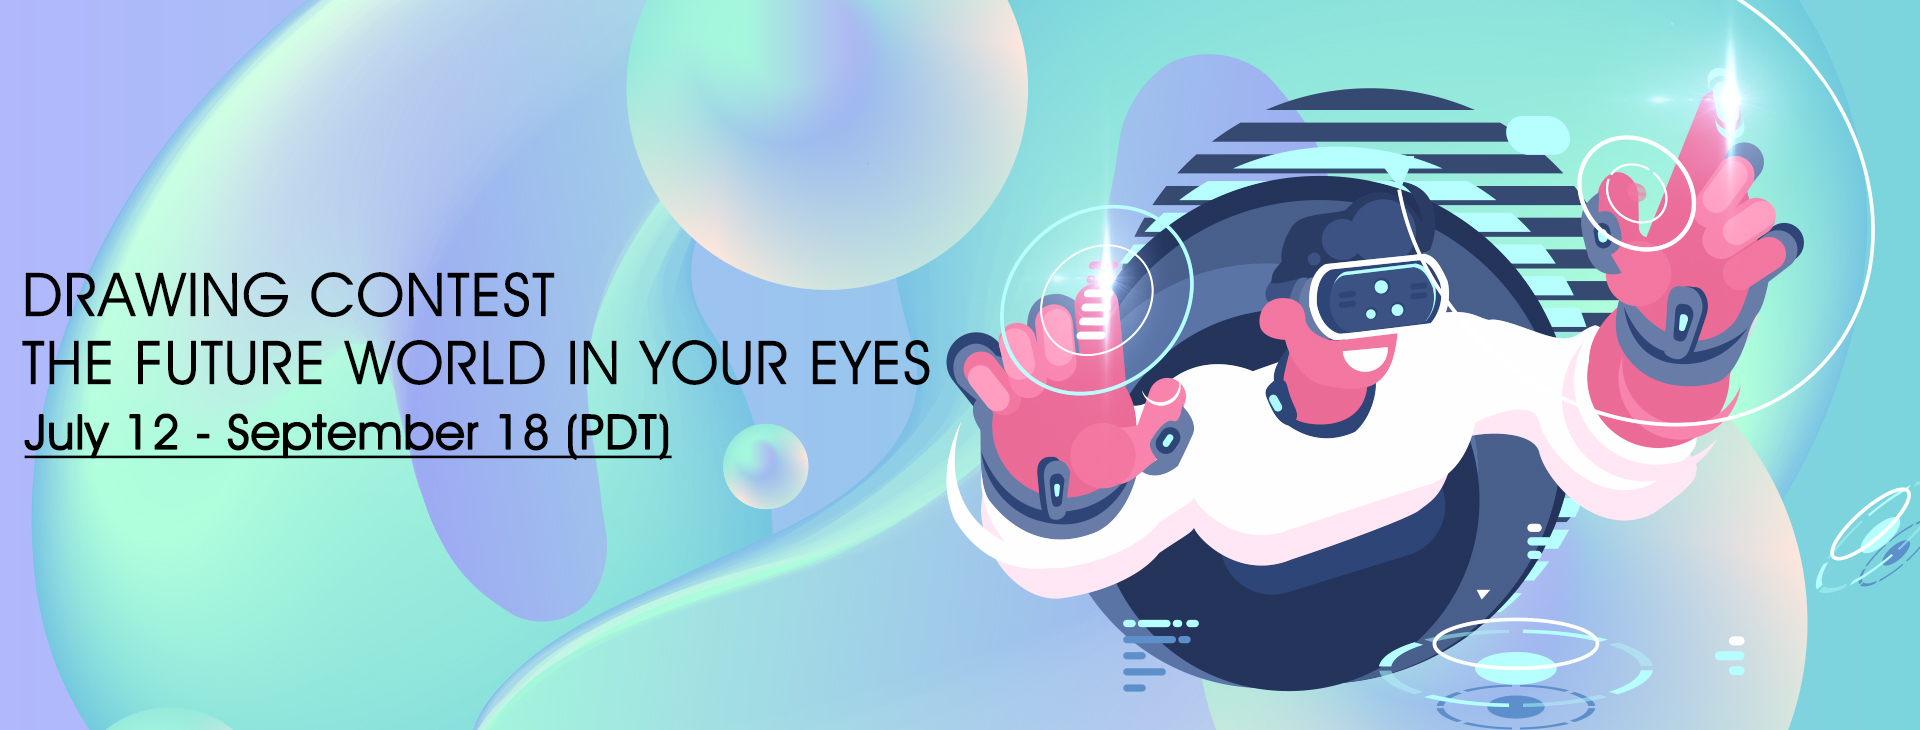 GAOMON “The Future World in Your Eyes” Drawing Contest